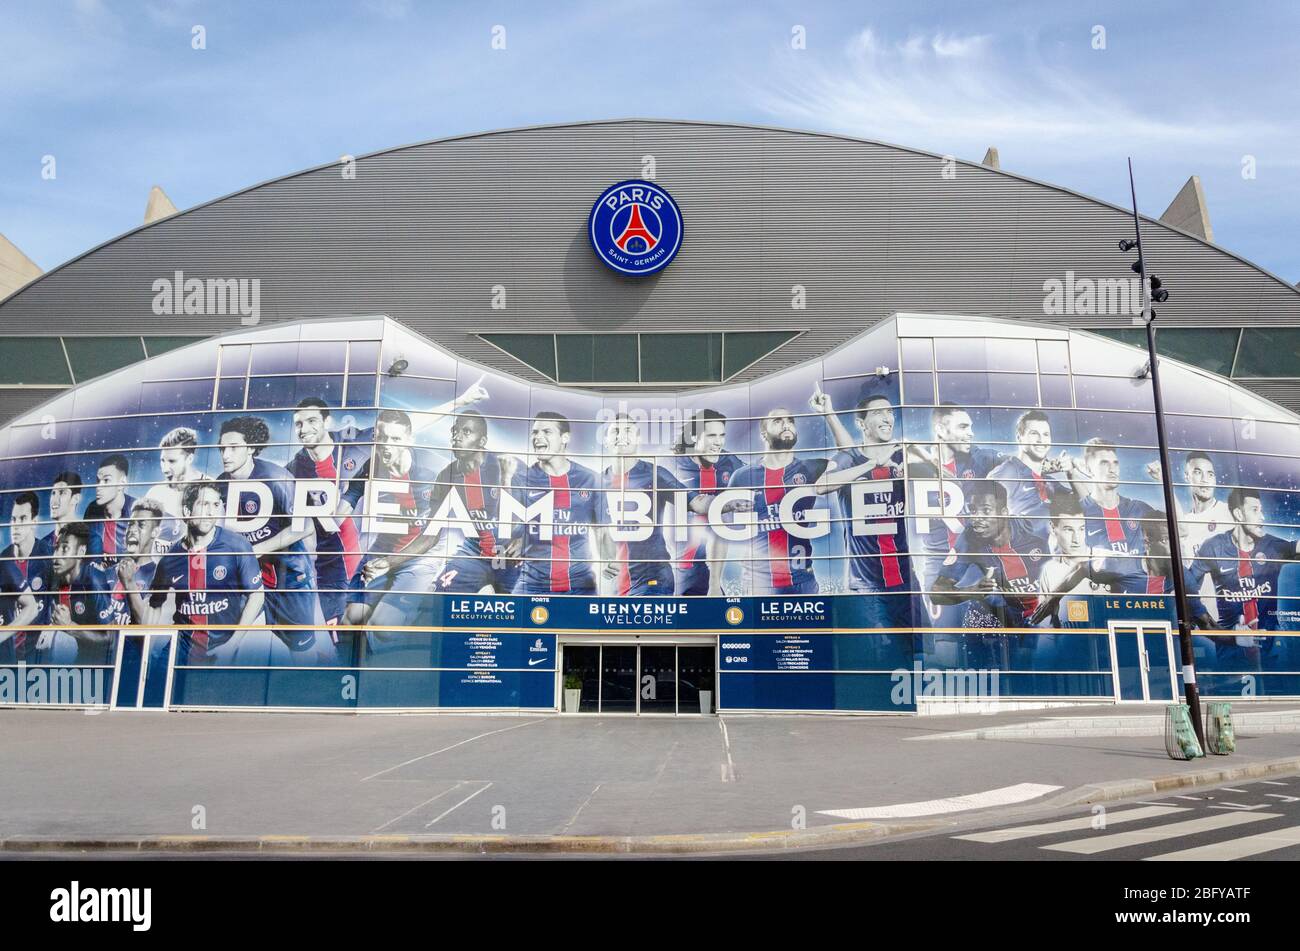 Parc des Princes Football Stadium which is home of Paris Saint-Germain Football Club, sporting a deserted look with shut entry gate in Paris, France Stock Photo